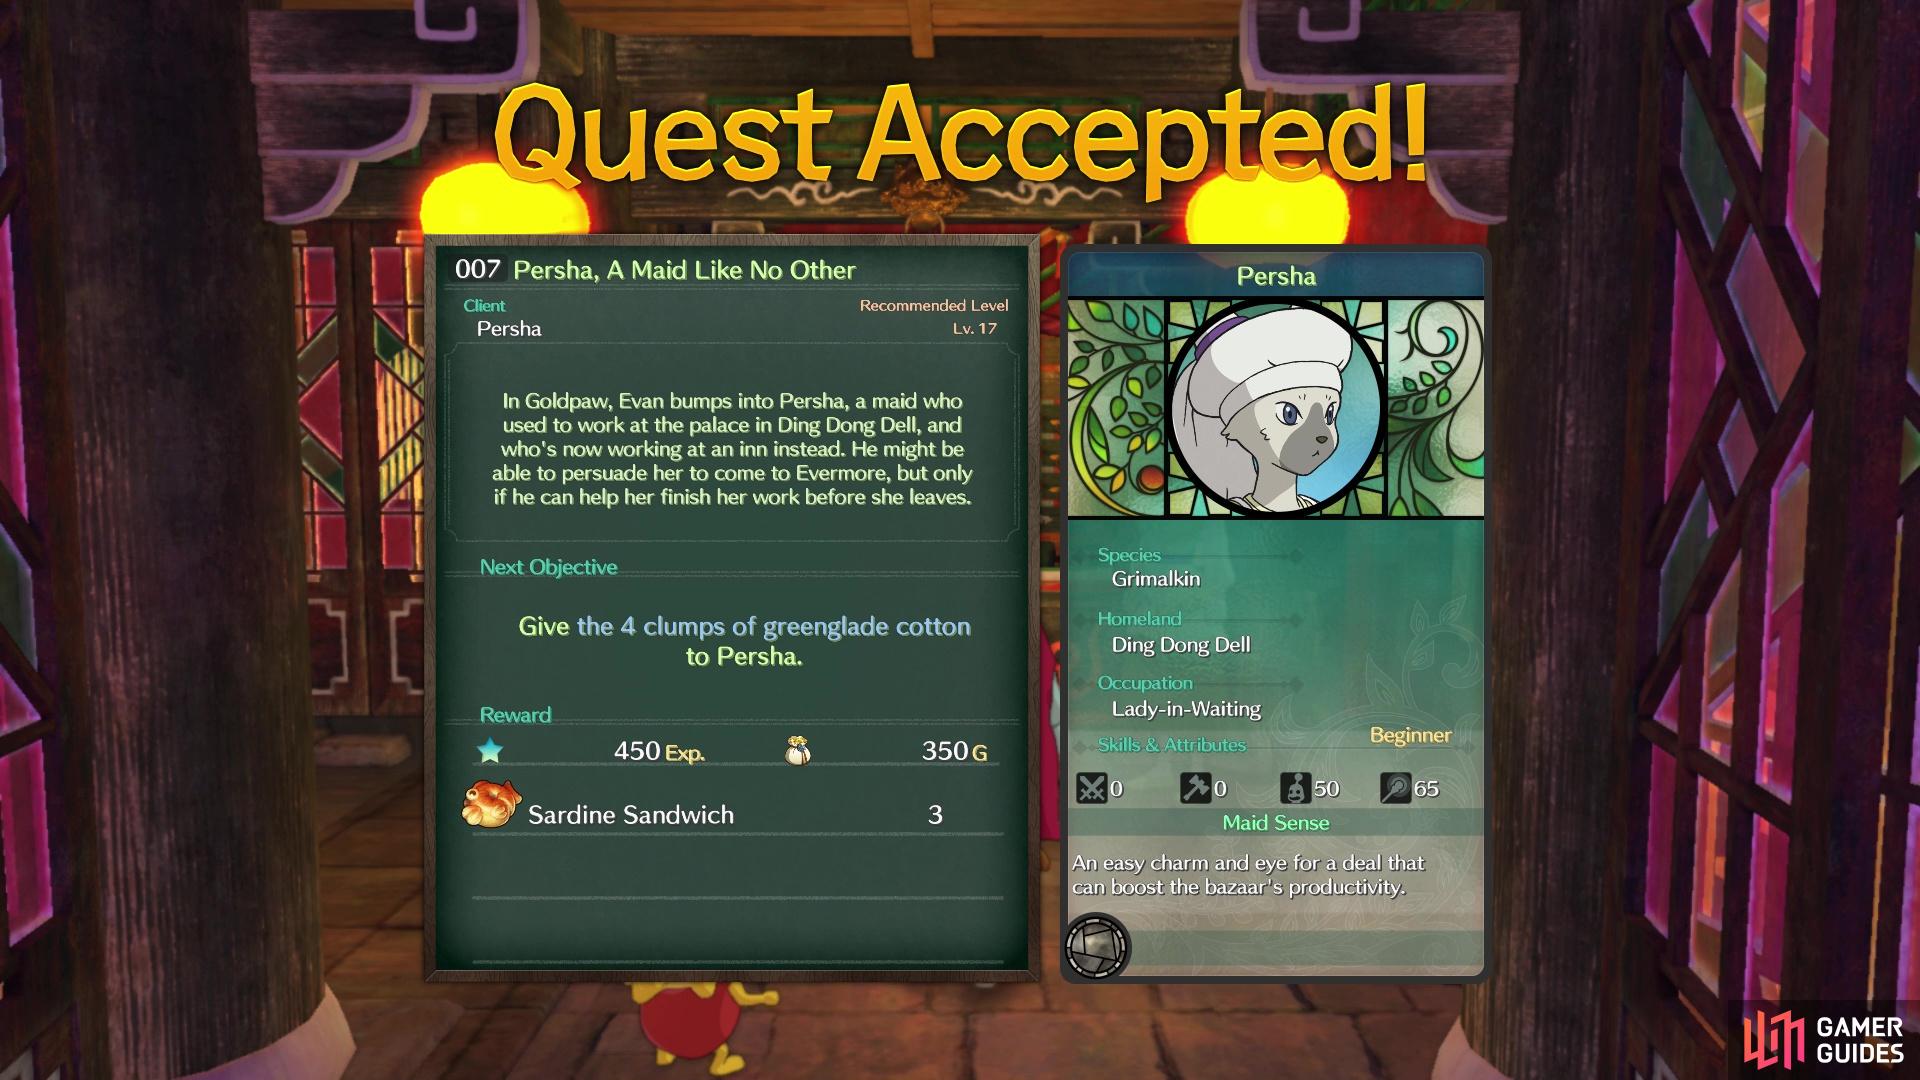 You’ll know a sidequest rewards a new citizen by the stats card on the right side